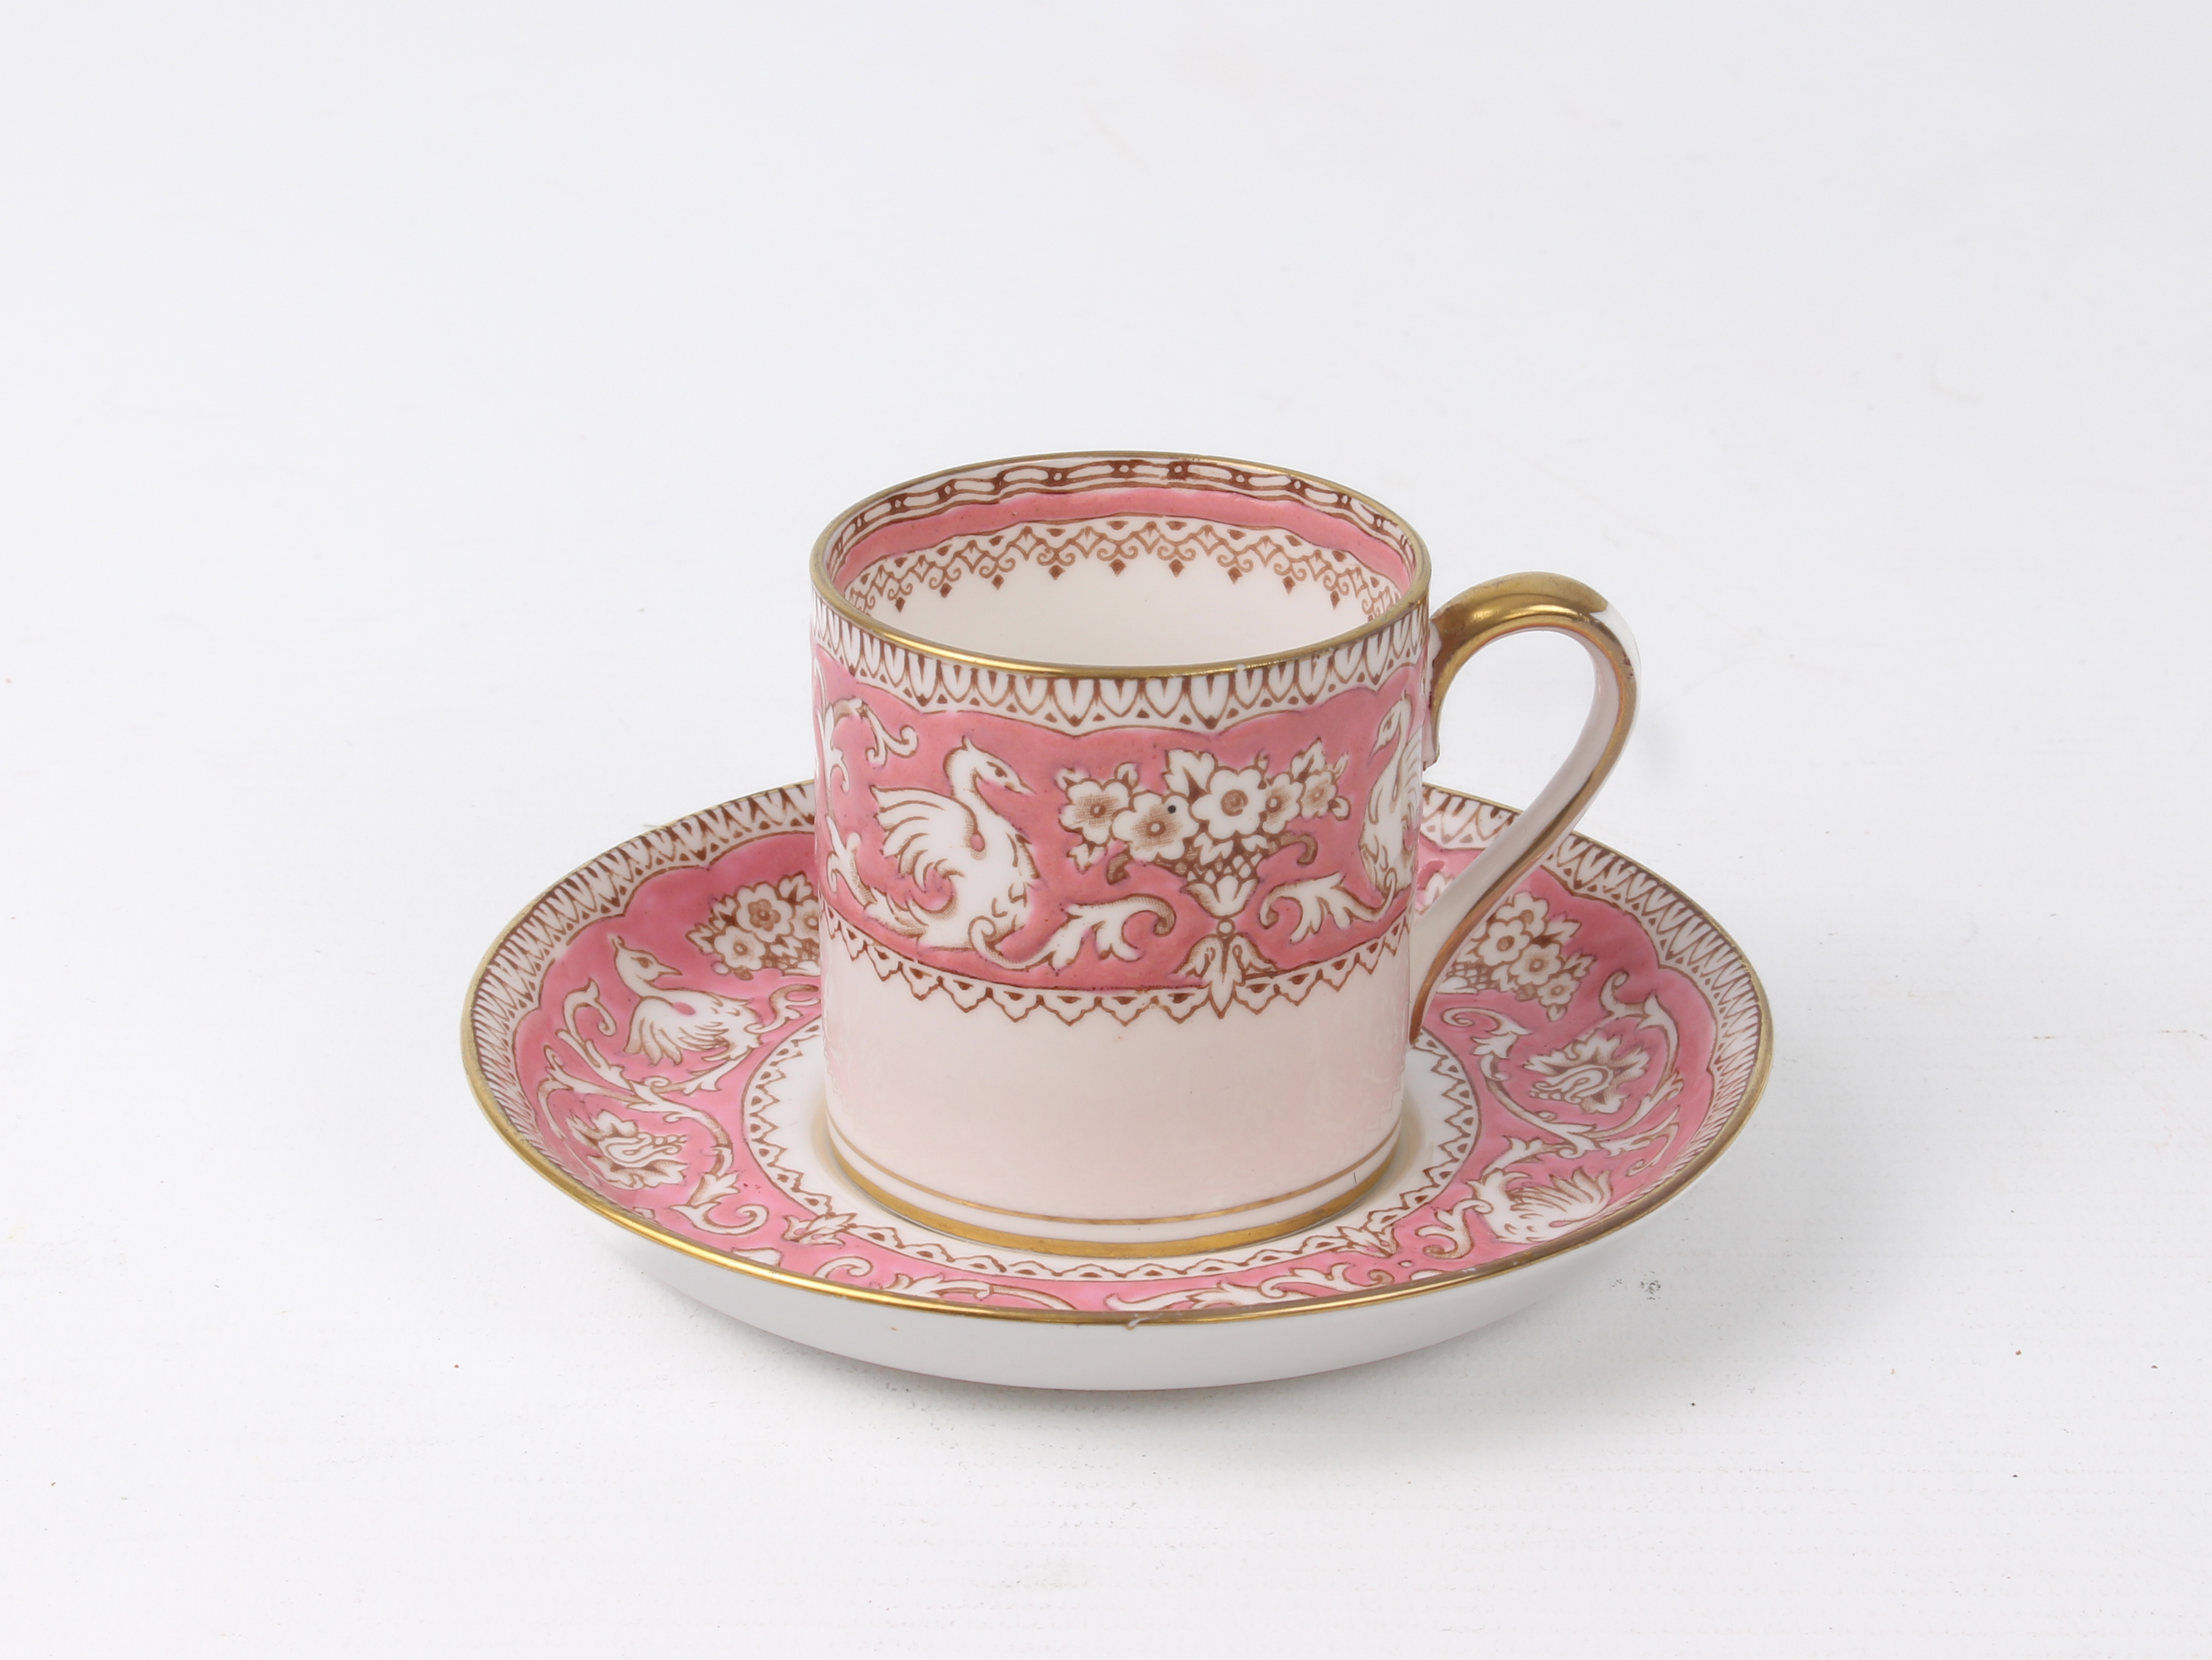 A Crown Staffordshire bone china coffee service - 1930s, 'Ellesmere' pattern, with decoration of - Image 2 of 5